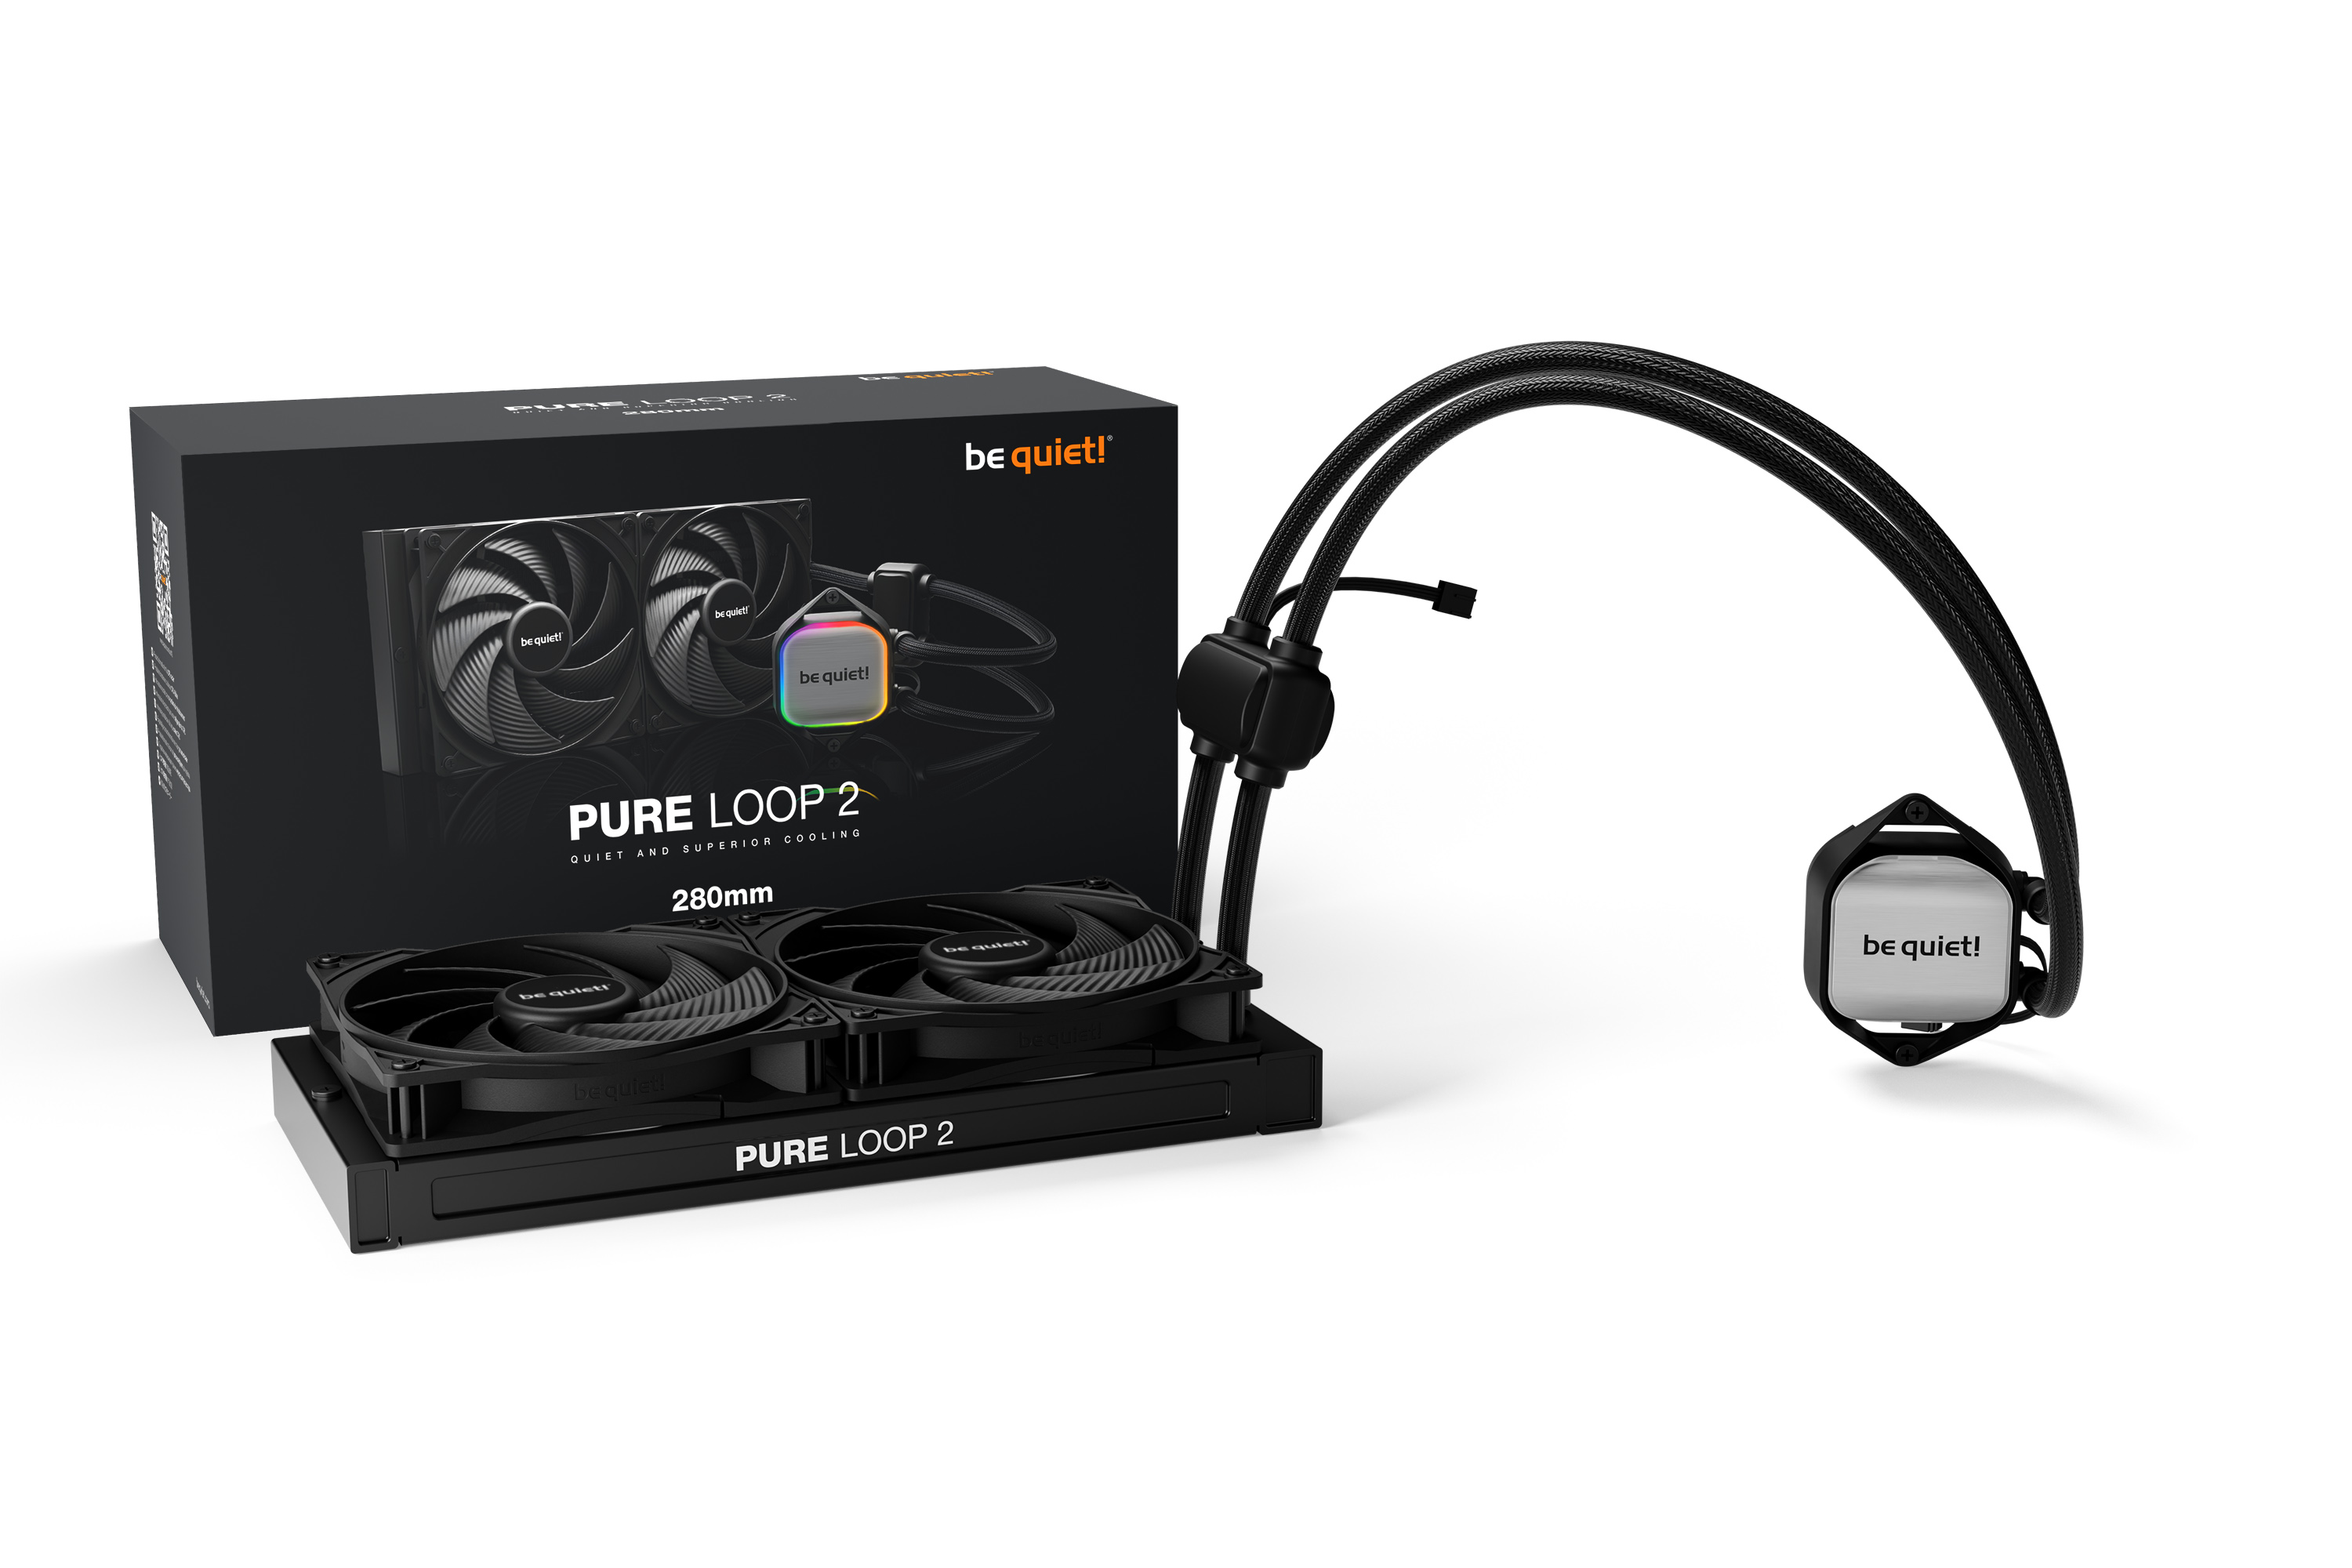    be quiet! Pure Loop 2 280mm (BW018)